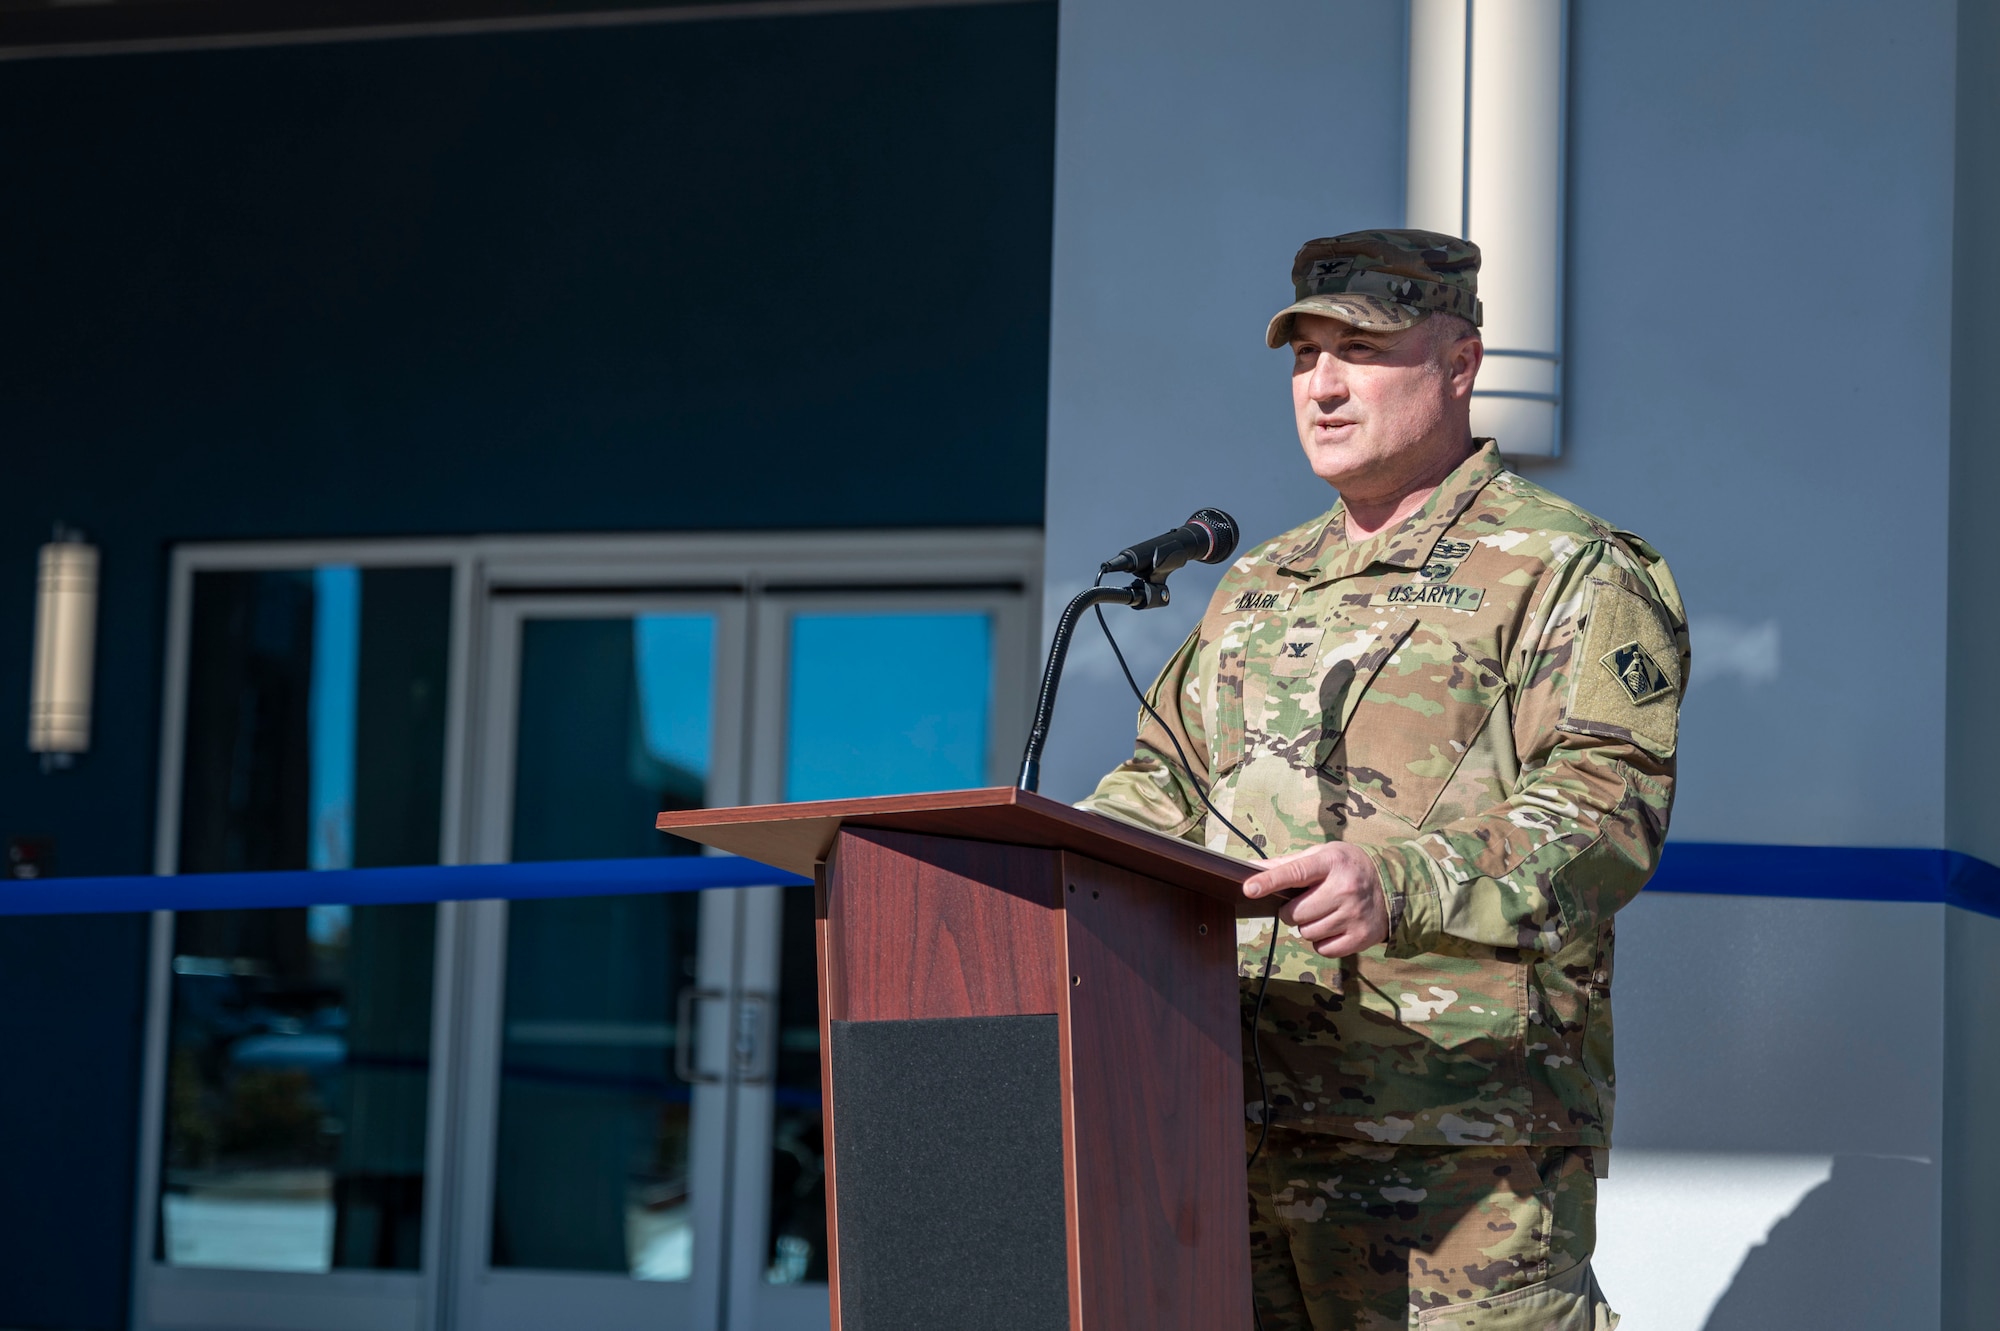 A man in uniform gives a speech while standing at a podium